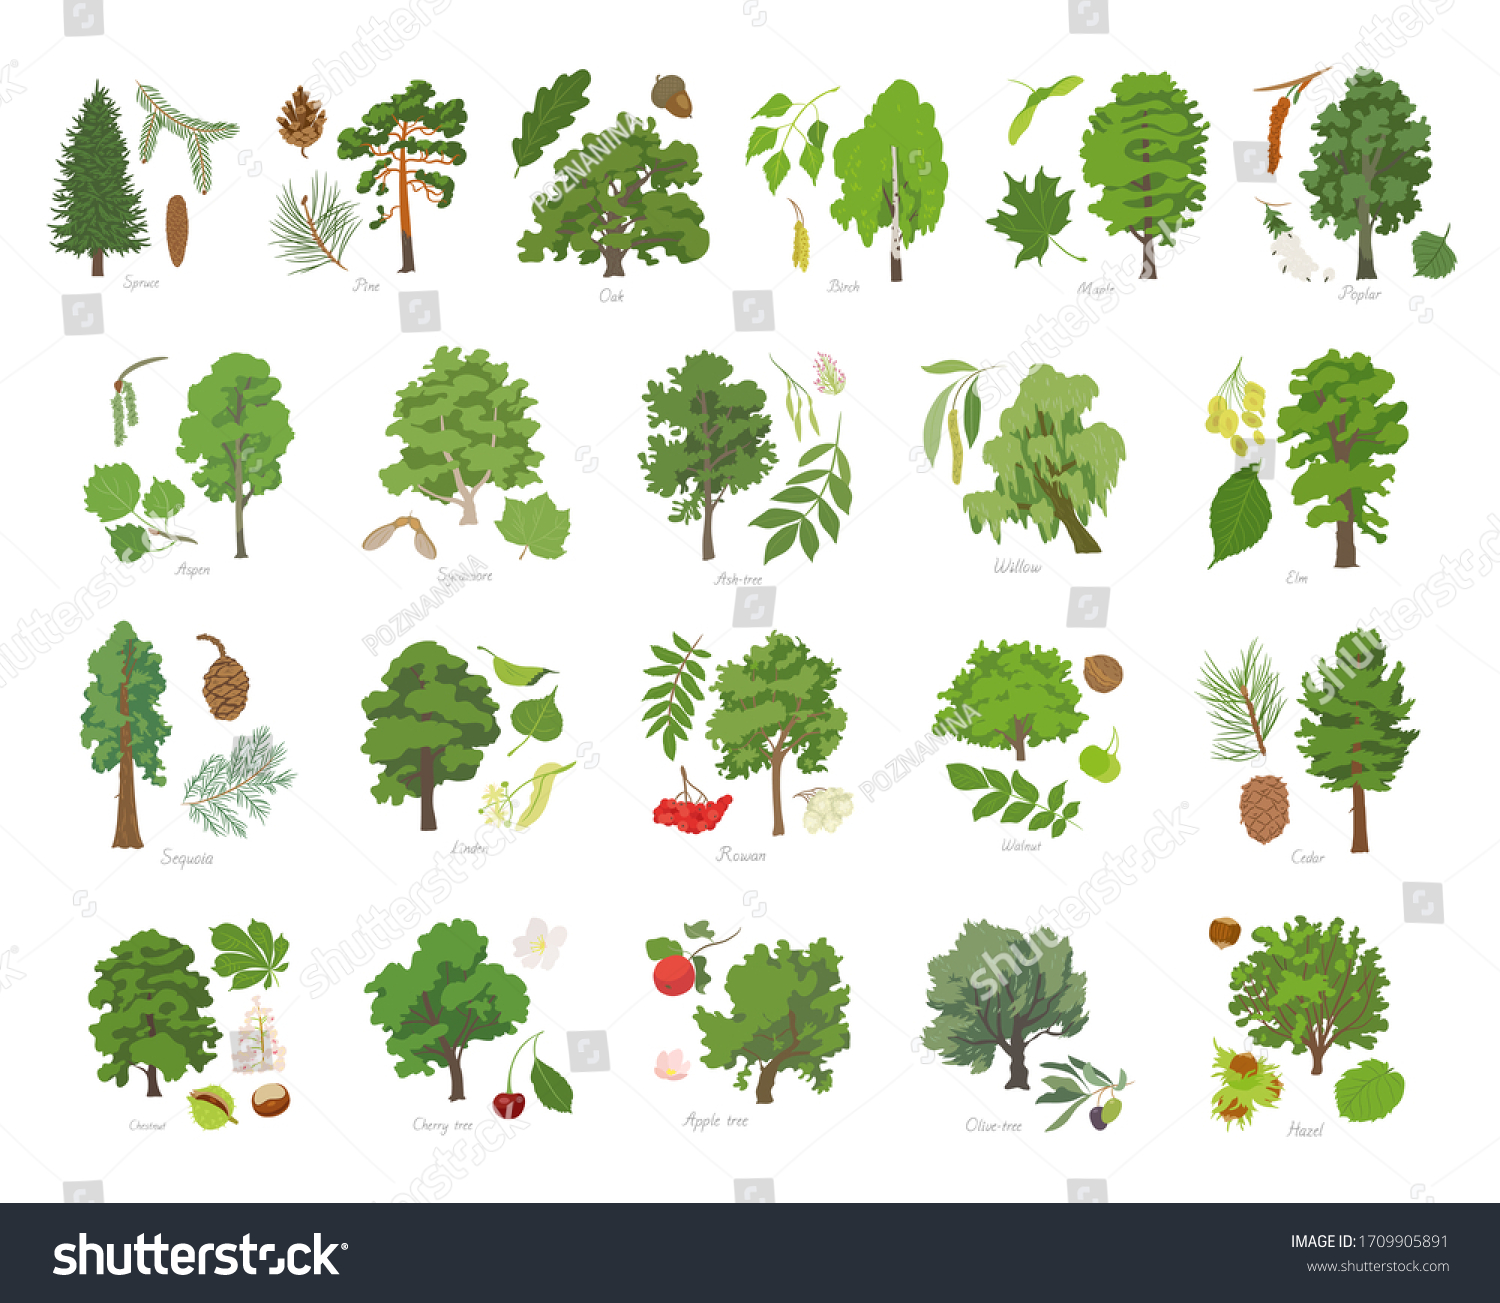 SVG of Vector illustration set of different kinds of trees with its parts and names. svg